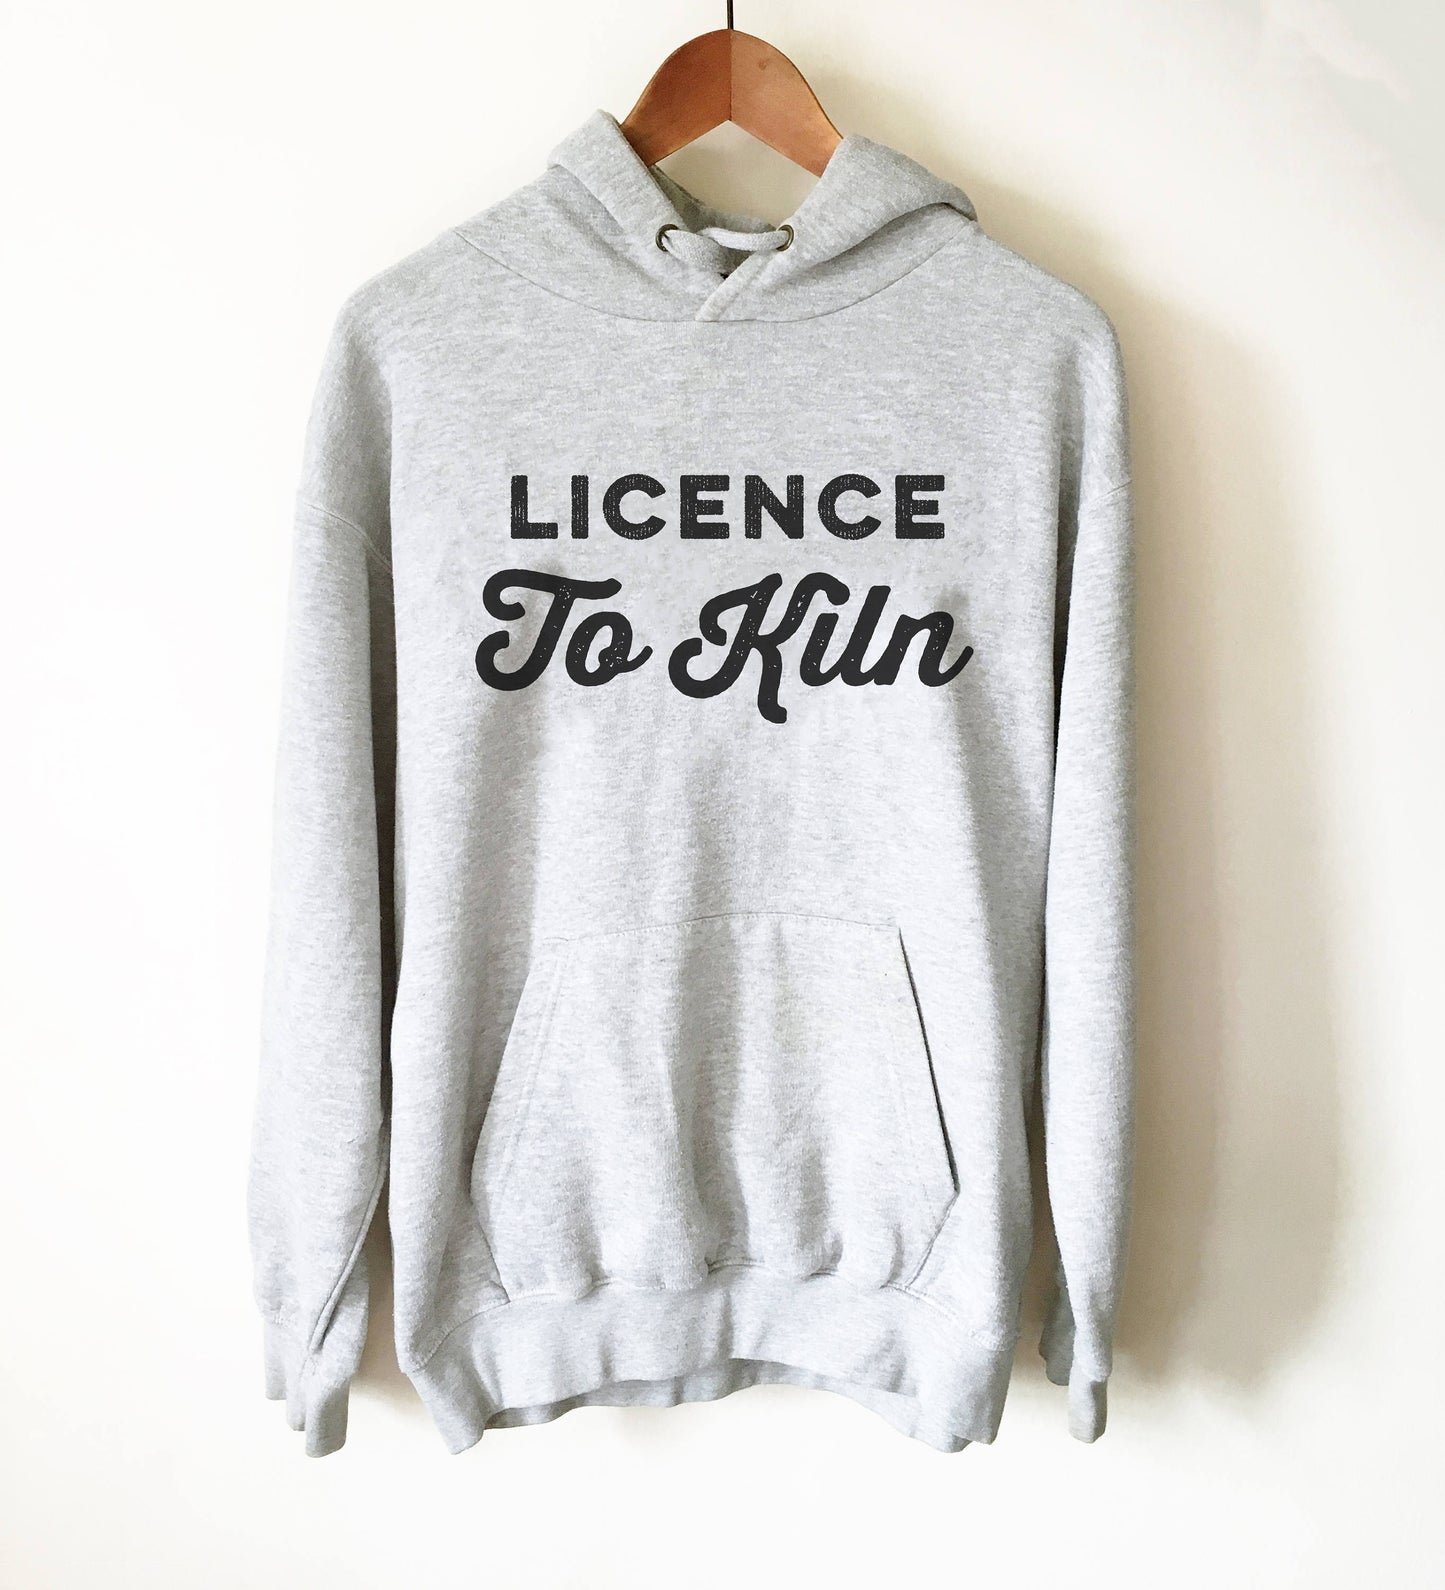 Licence To Kiln Hoodie - Pottery shirt | Pottery lover | Funny pottery shirt | Ceramics and pottery | Pottery gift